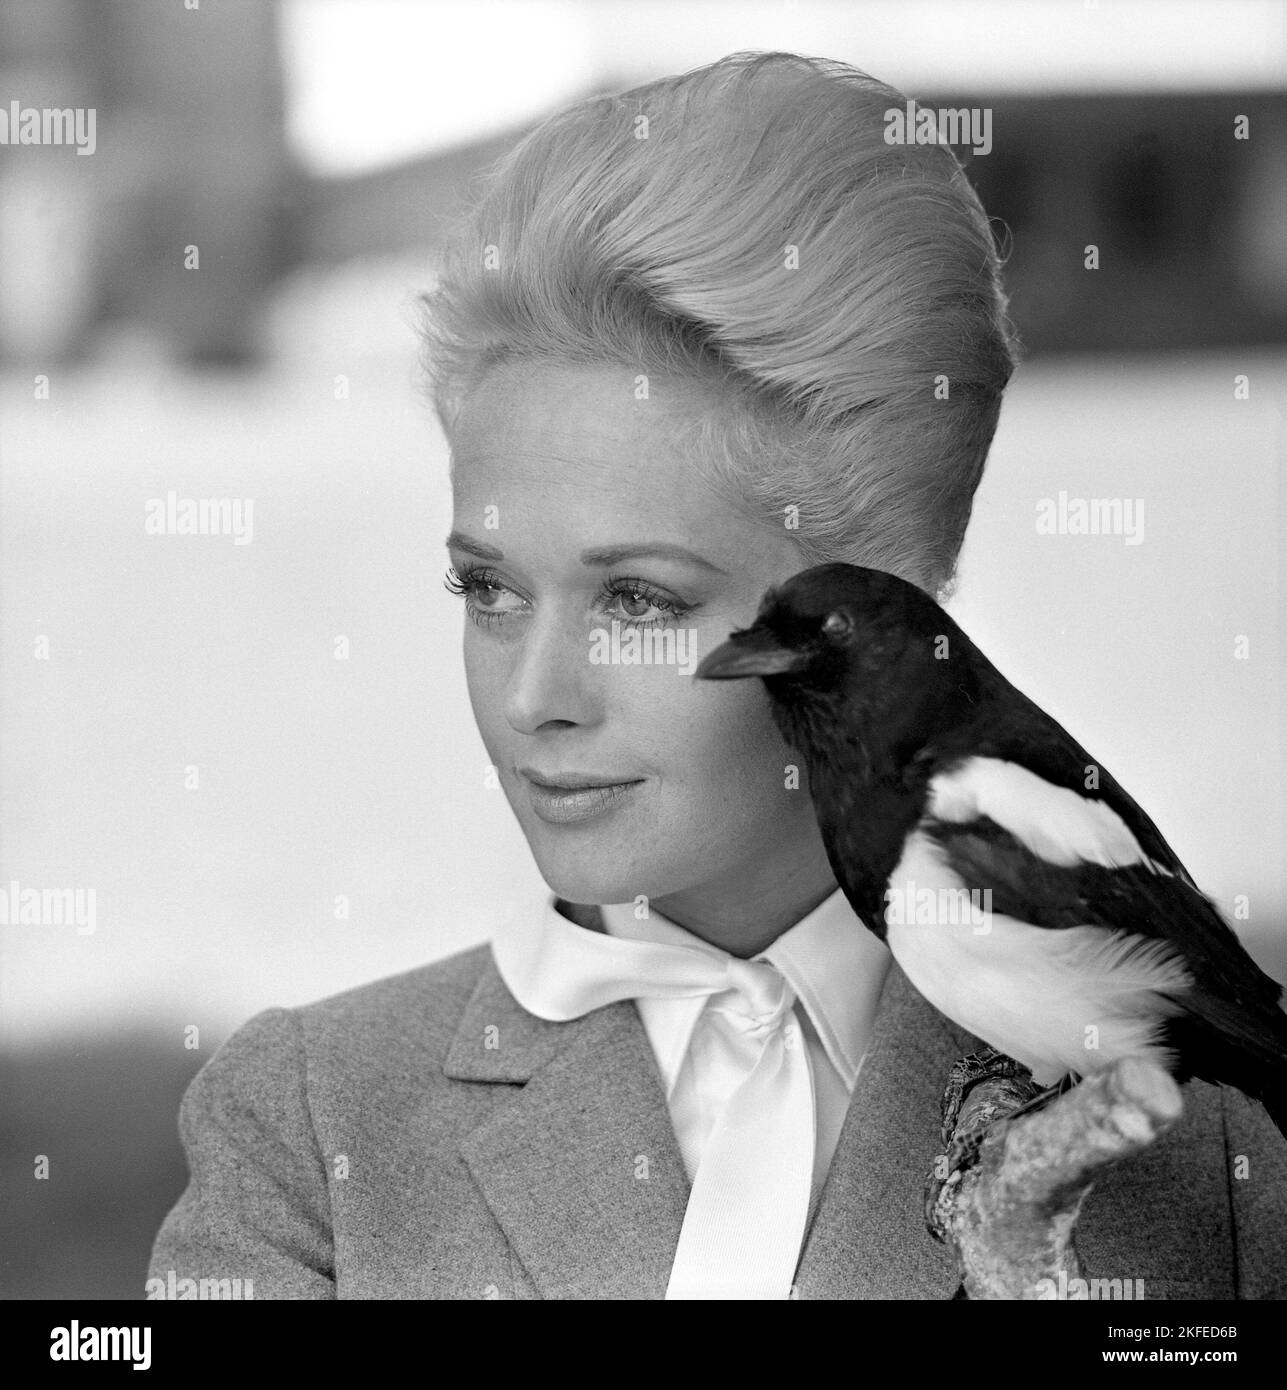 Tippi Hedren. American actress, born january 19 1930. She was discovered by film director Alfred Hitchcock and achieved great praise for her work in the suspense-thriller The Birds 1963. Pictured when visiting Sweden to promote the film. Stock Photo